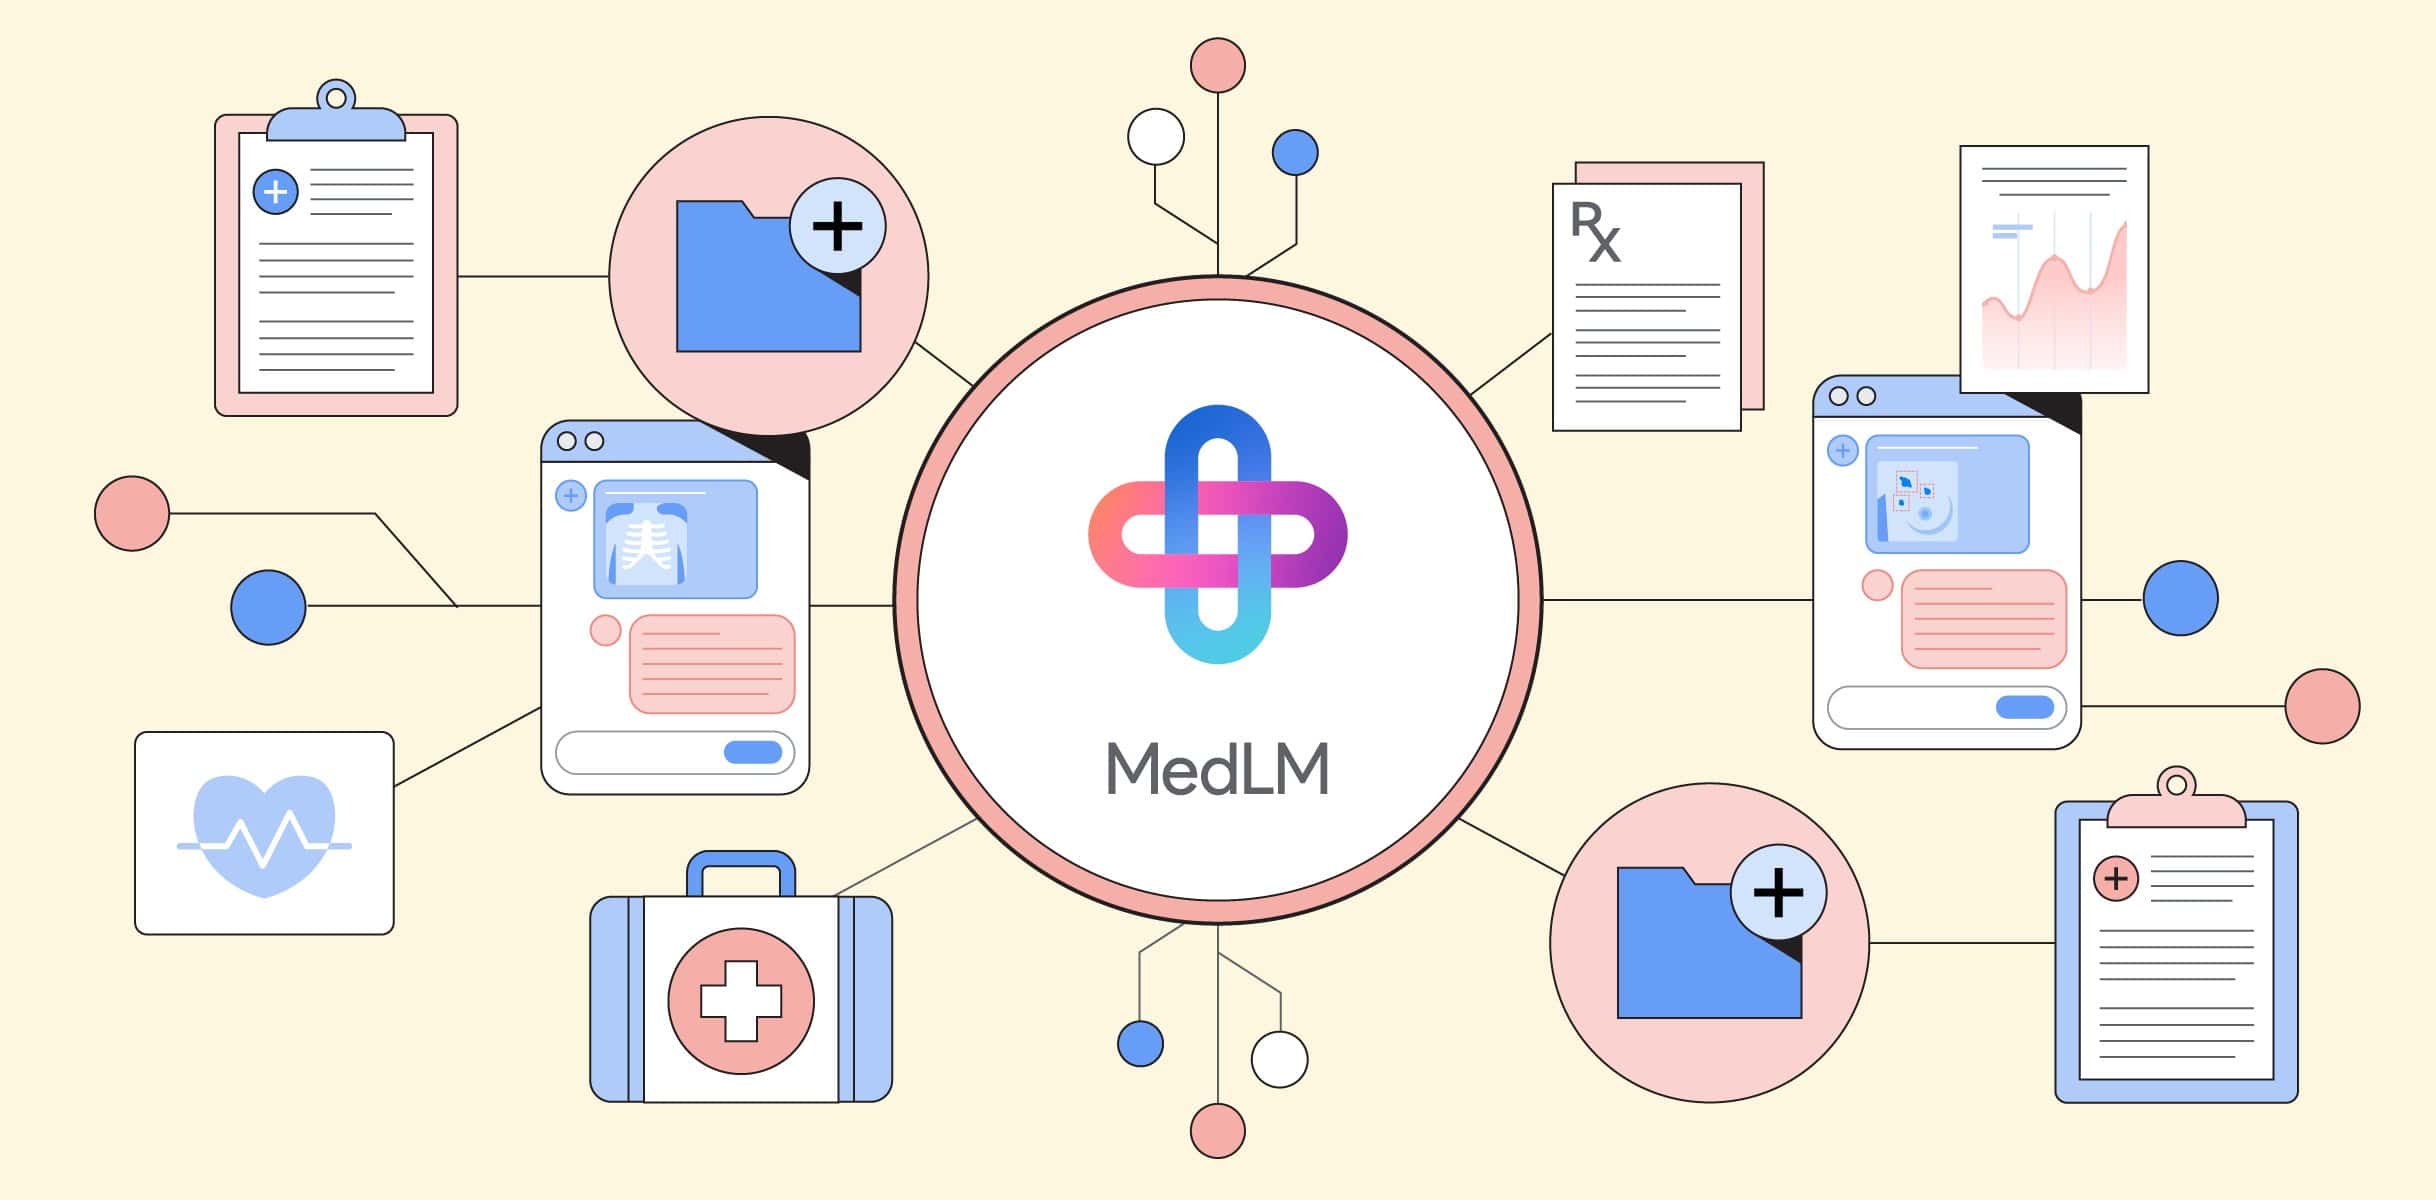 Google's MedLM revolutionizes healthcare with AI-powered clinical support